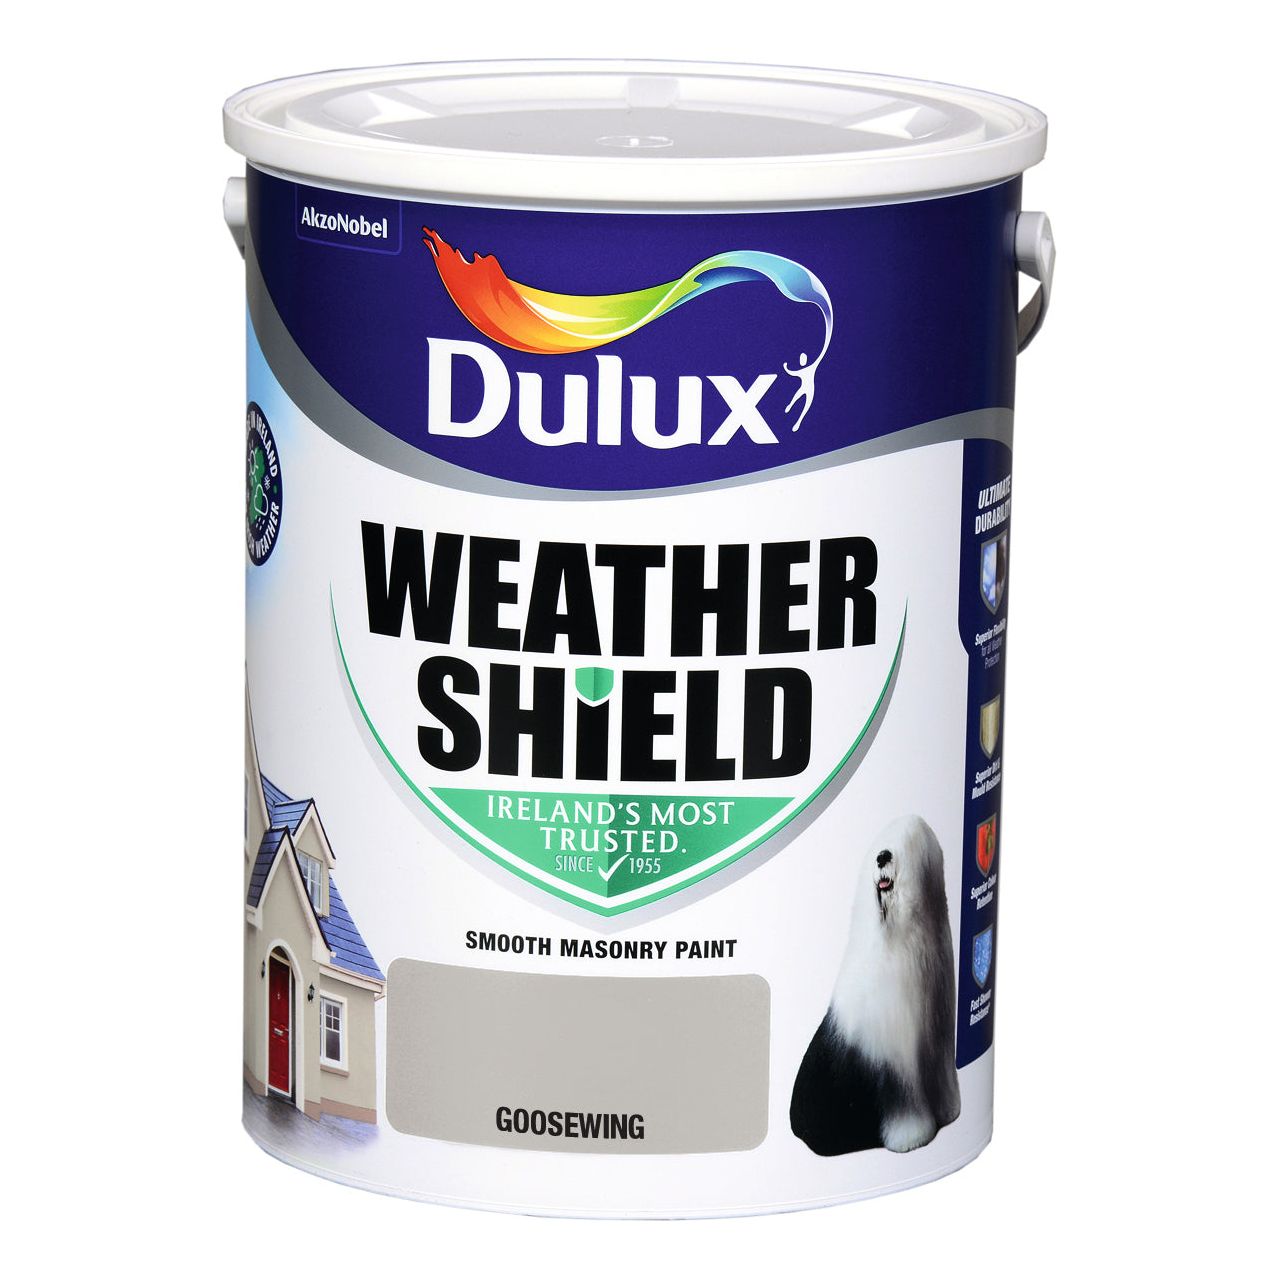 Dulux Goosewing 5L Weathershield